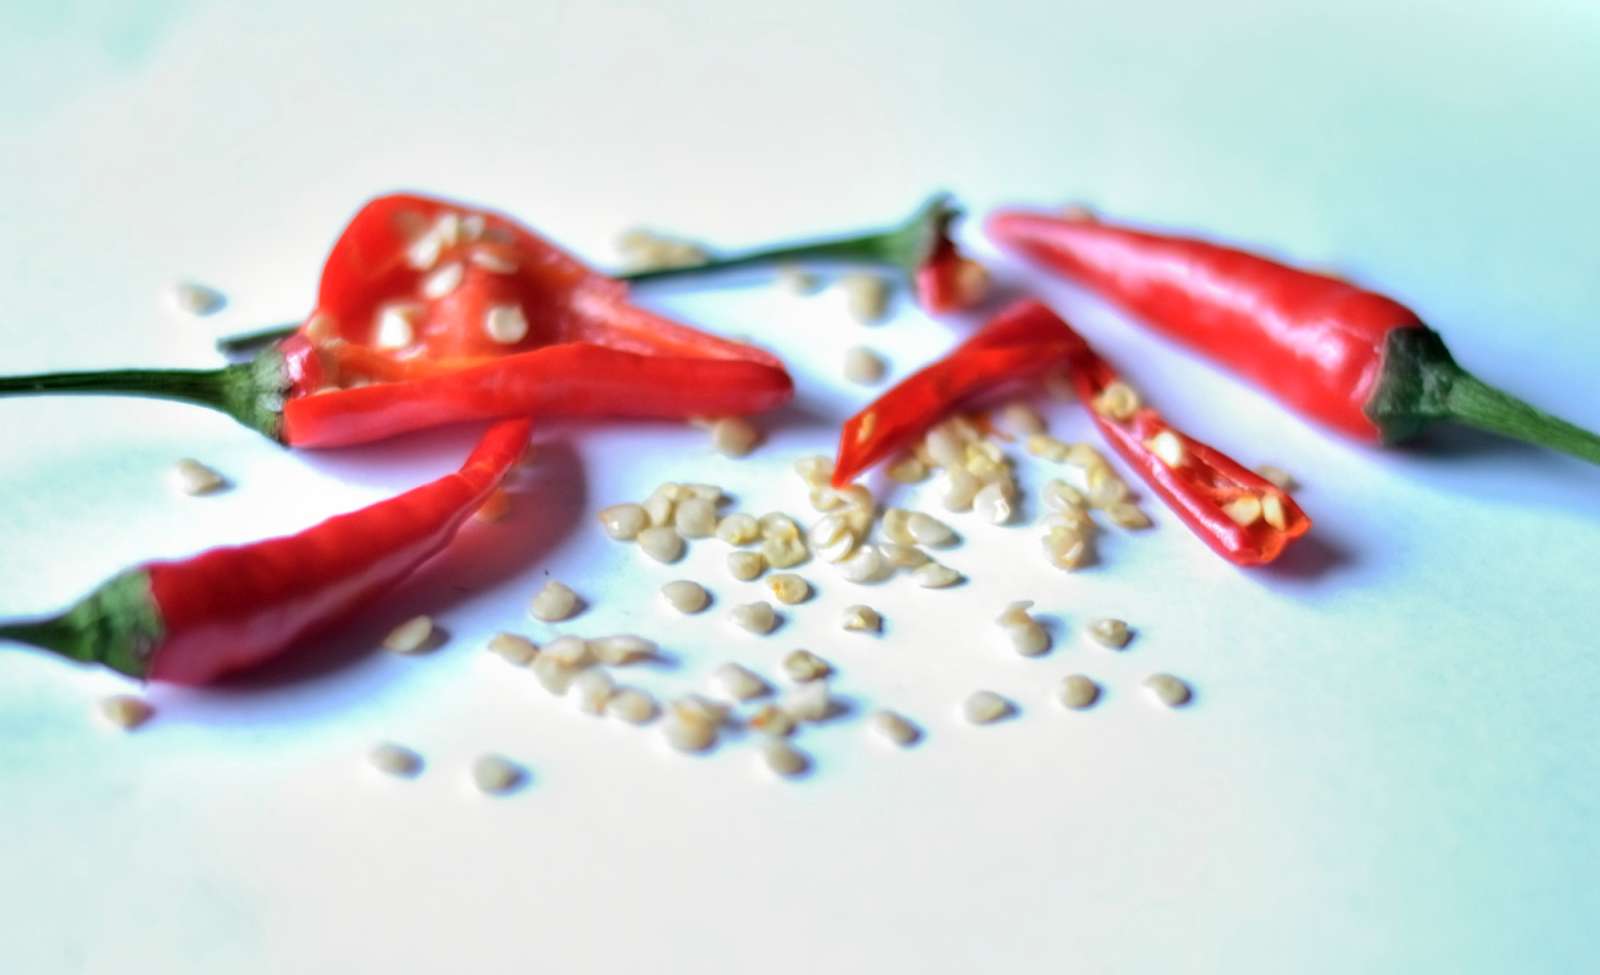 Removing seeds from Thai chillies